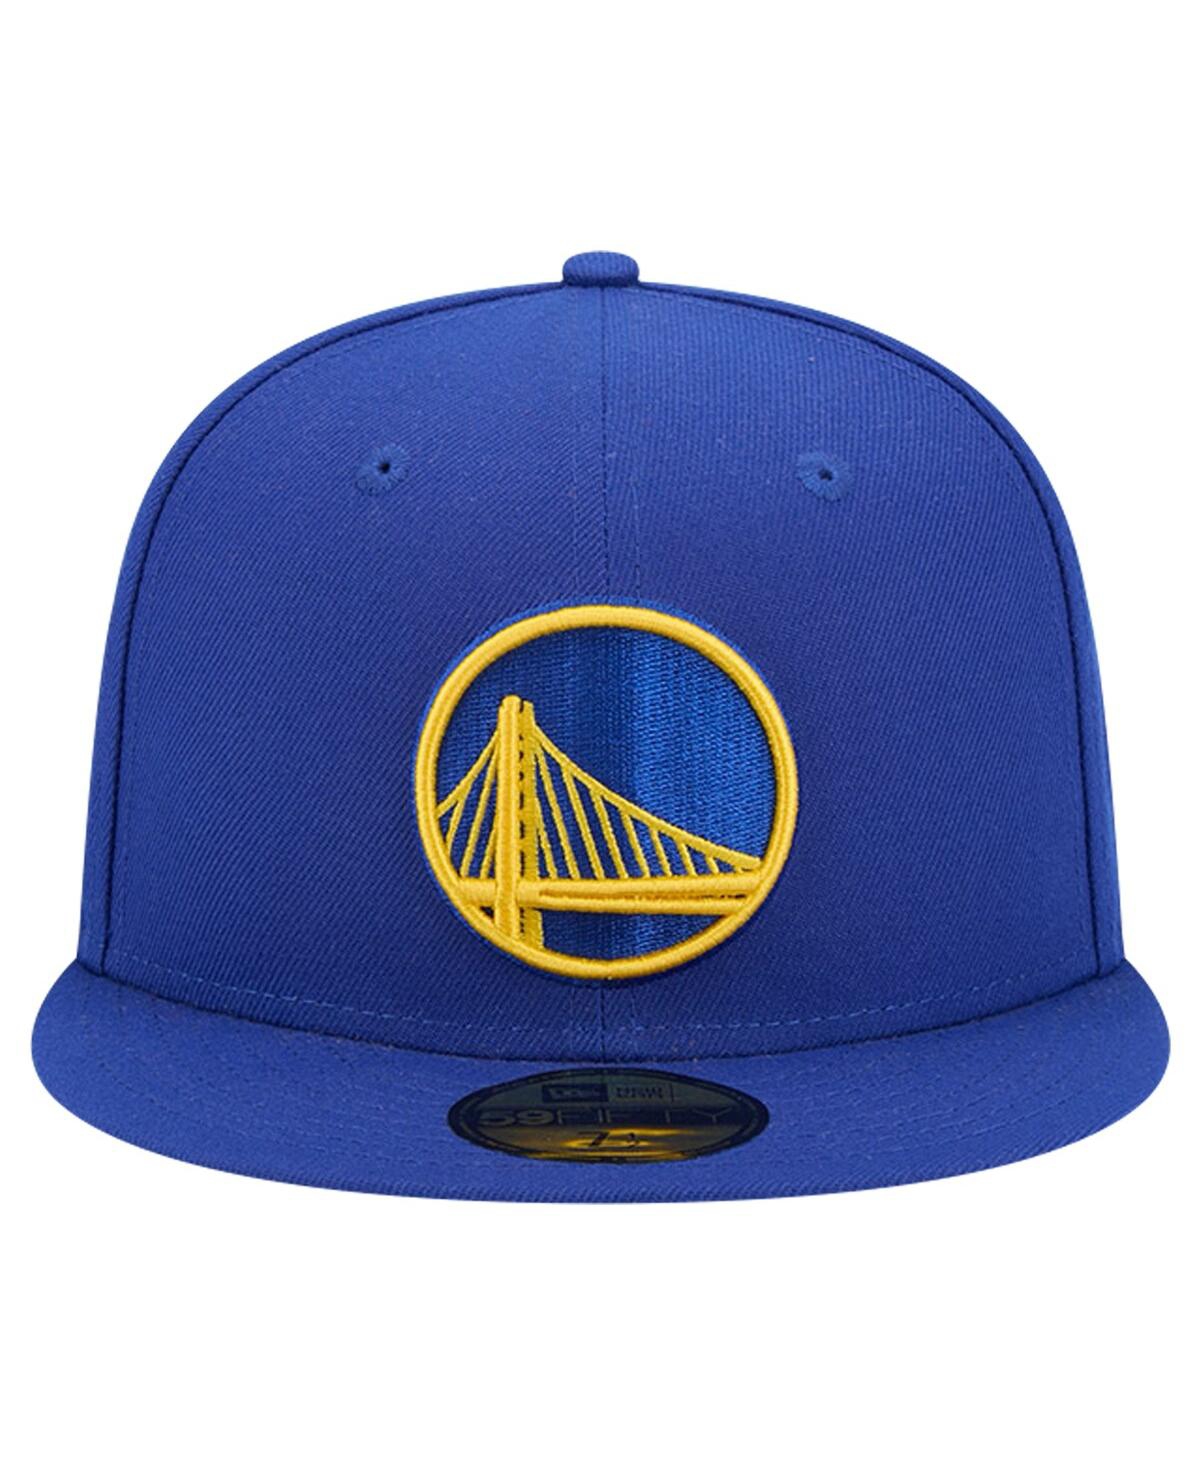 Shop New Era Men's Royal Golden State Warriors Court Sport Leather Applique 59fifty Fitted Hat